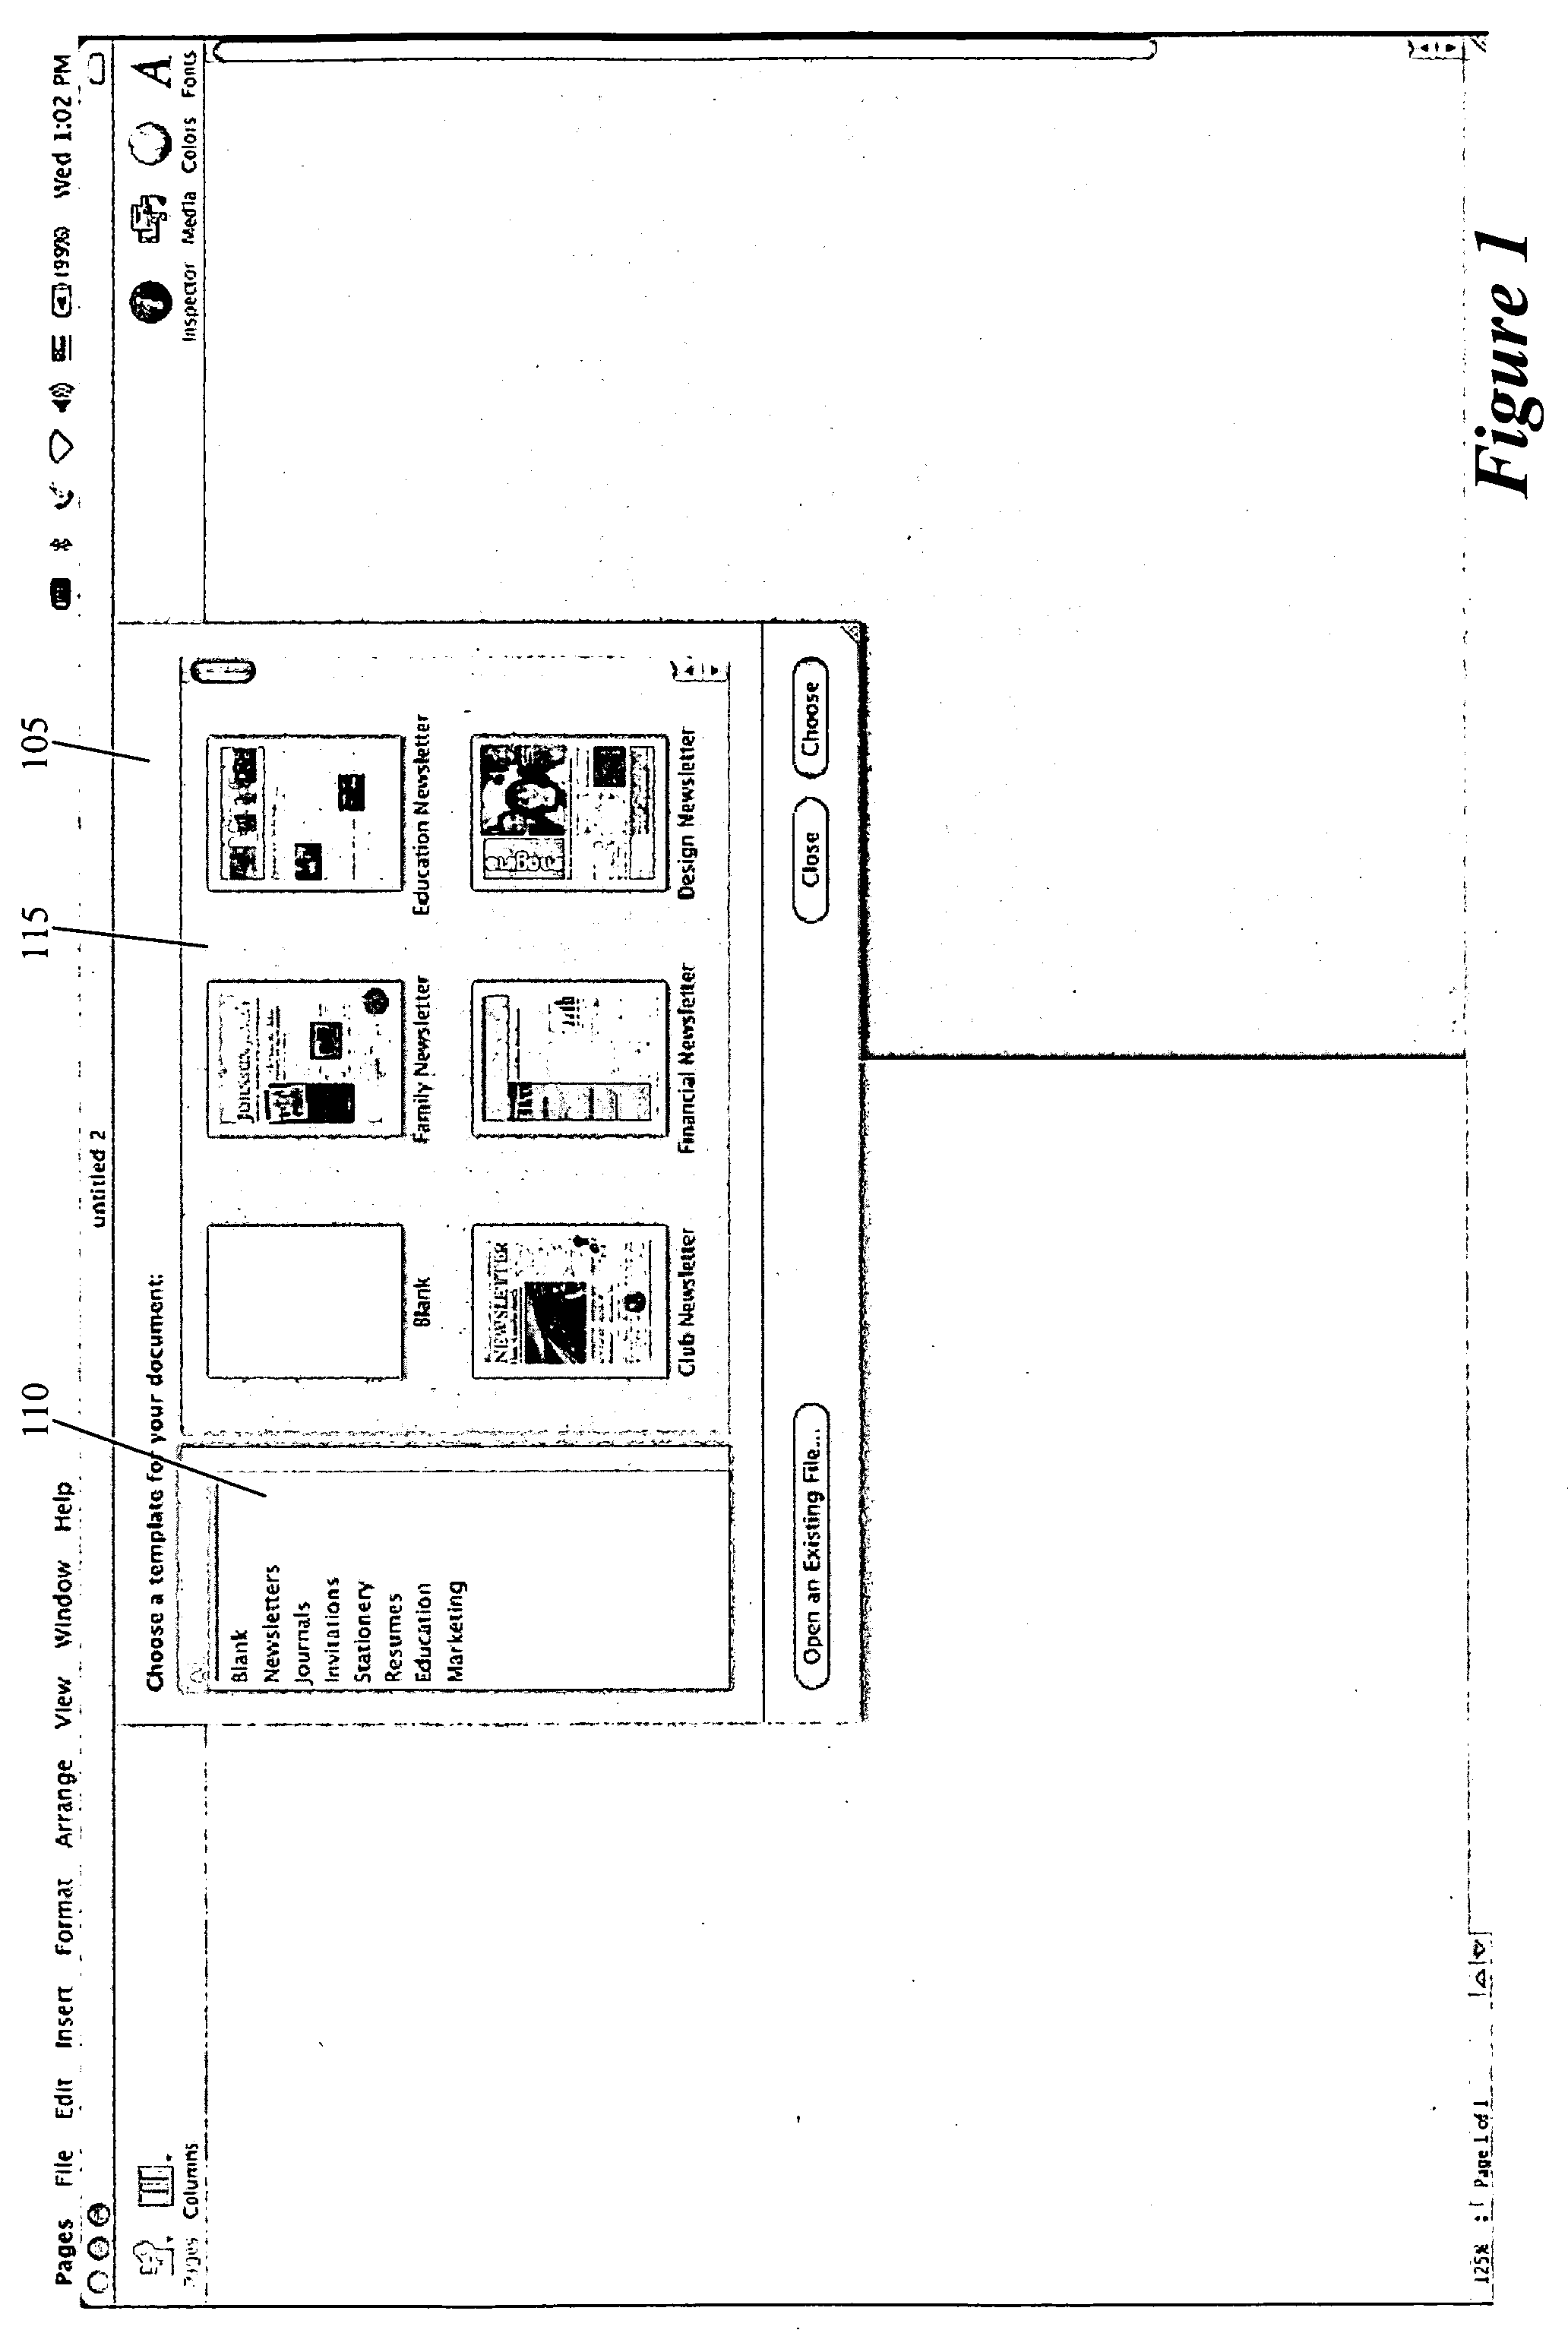 Method and apparatus for defining documents